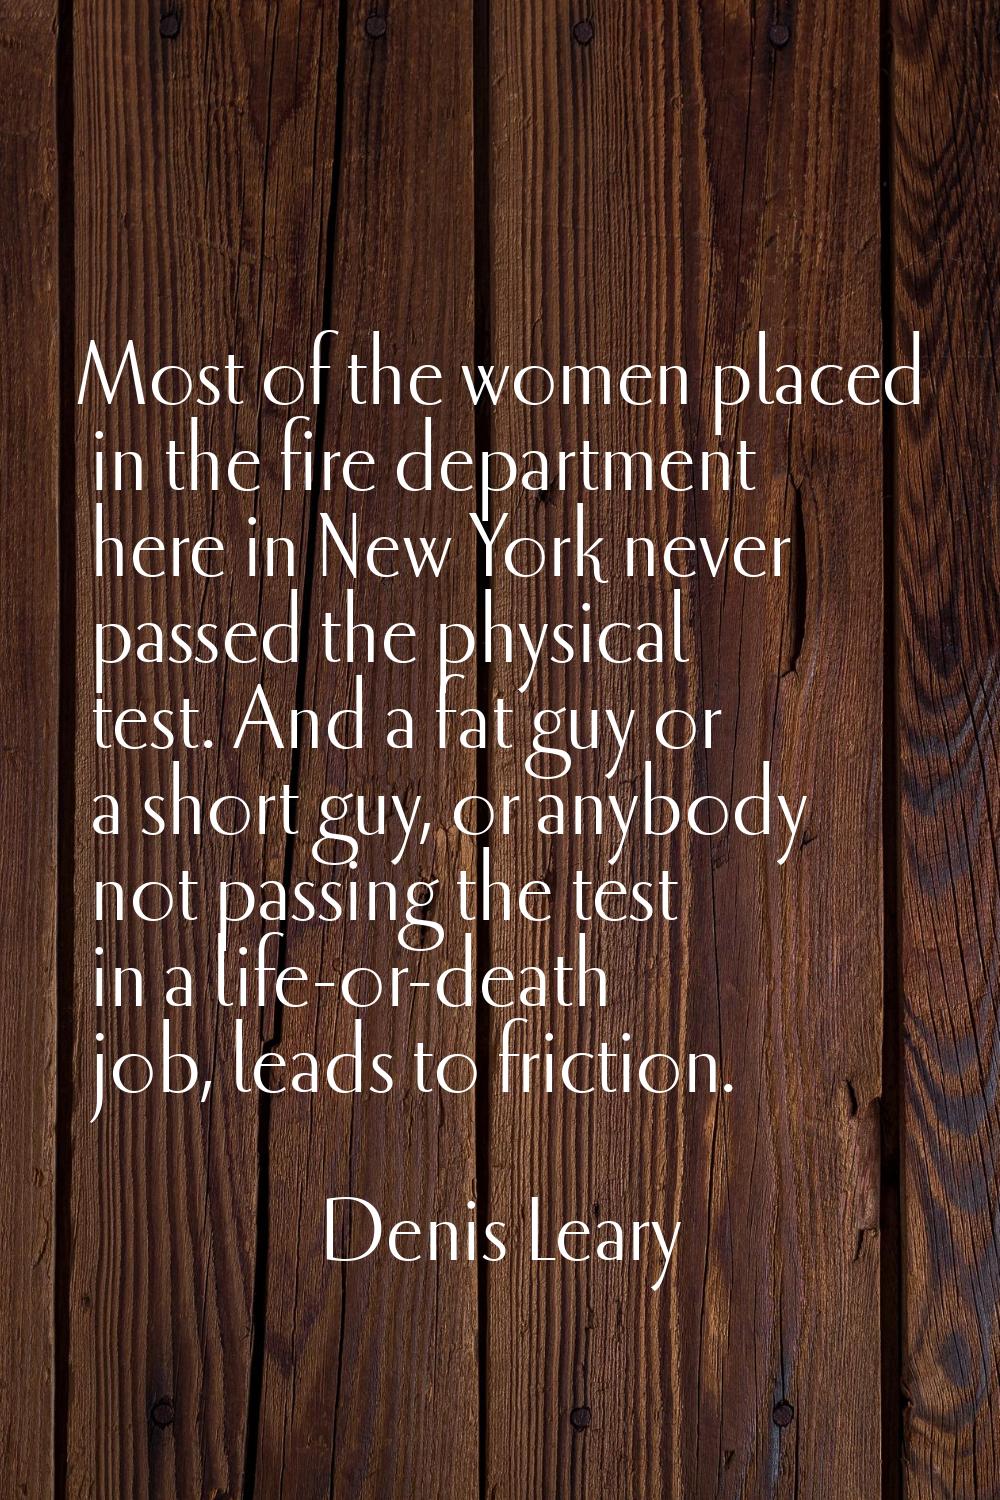 Most of the women placed in the fire department here in New York never passed the physical test. An